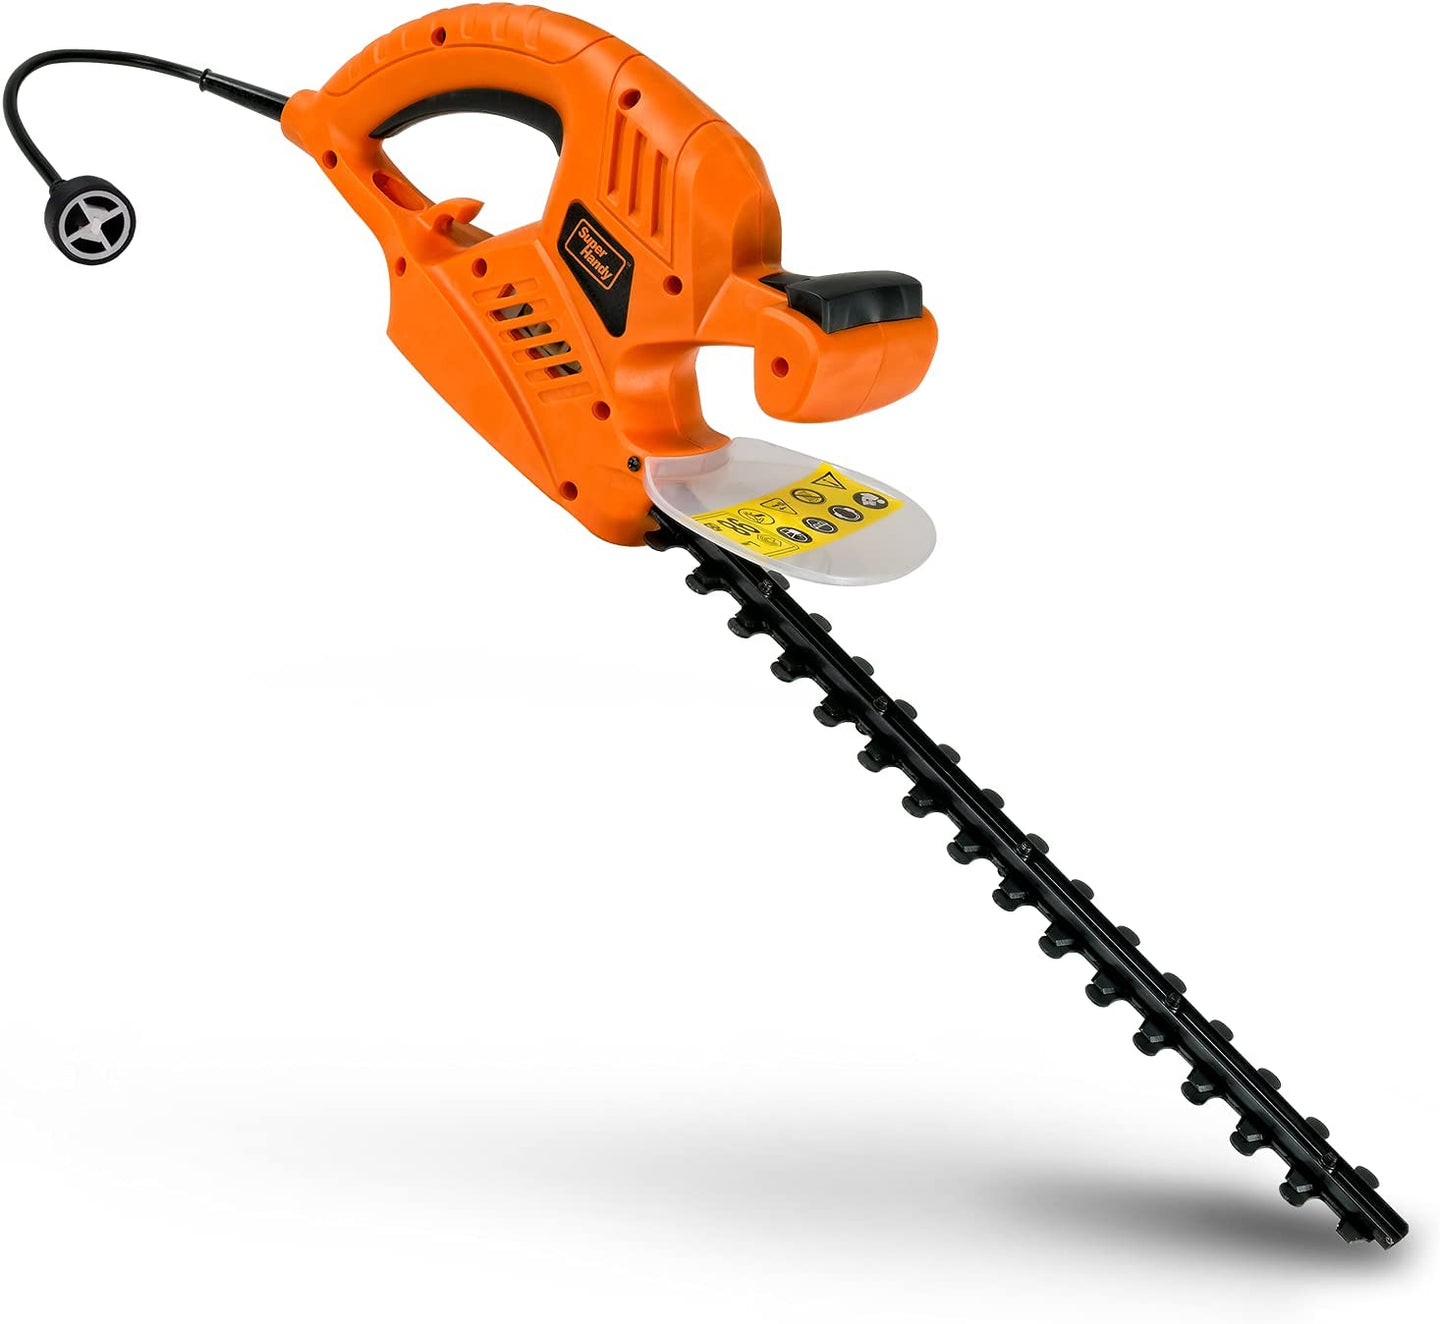 SuperHandy Hedge Trimmer 20-Inch Corded Electric 120V 4-Amp Lightweight Lawn and Garden Landscaping